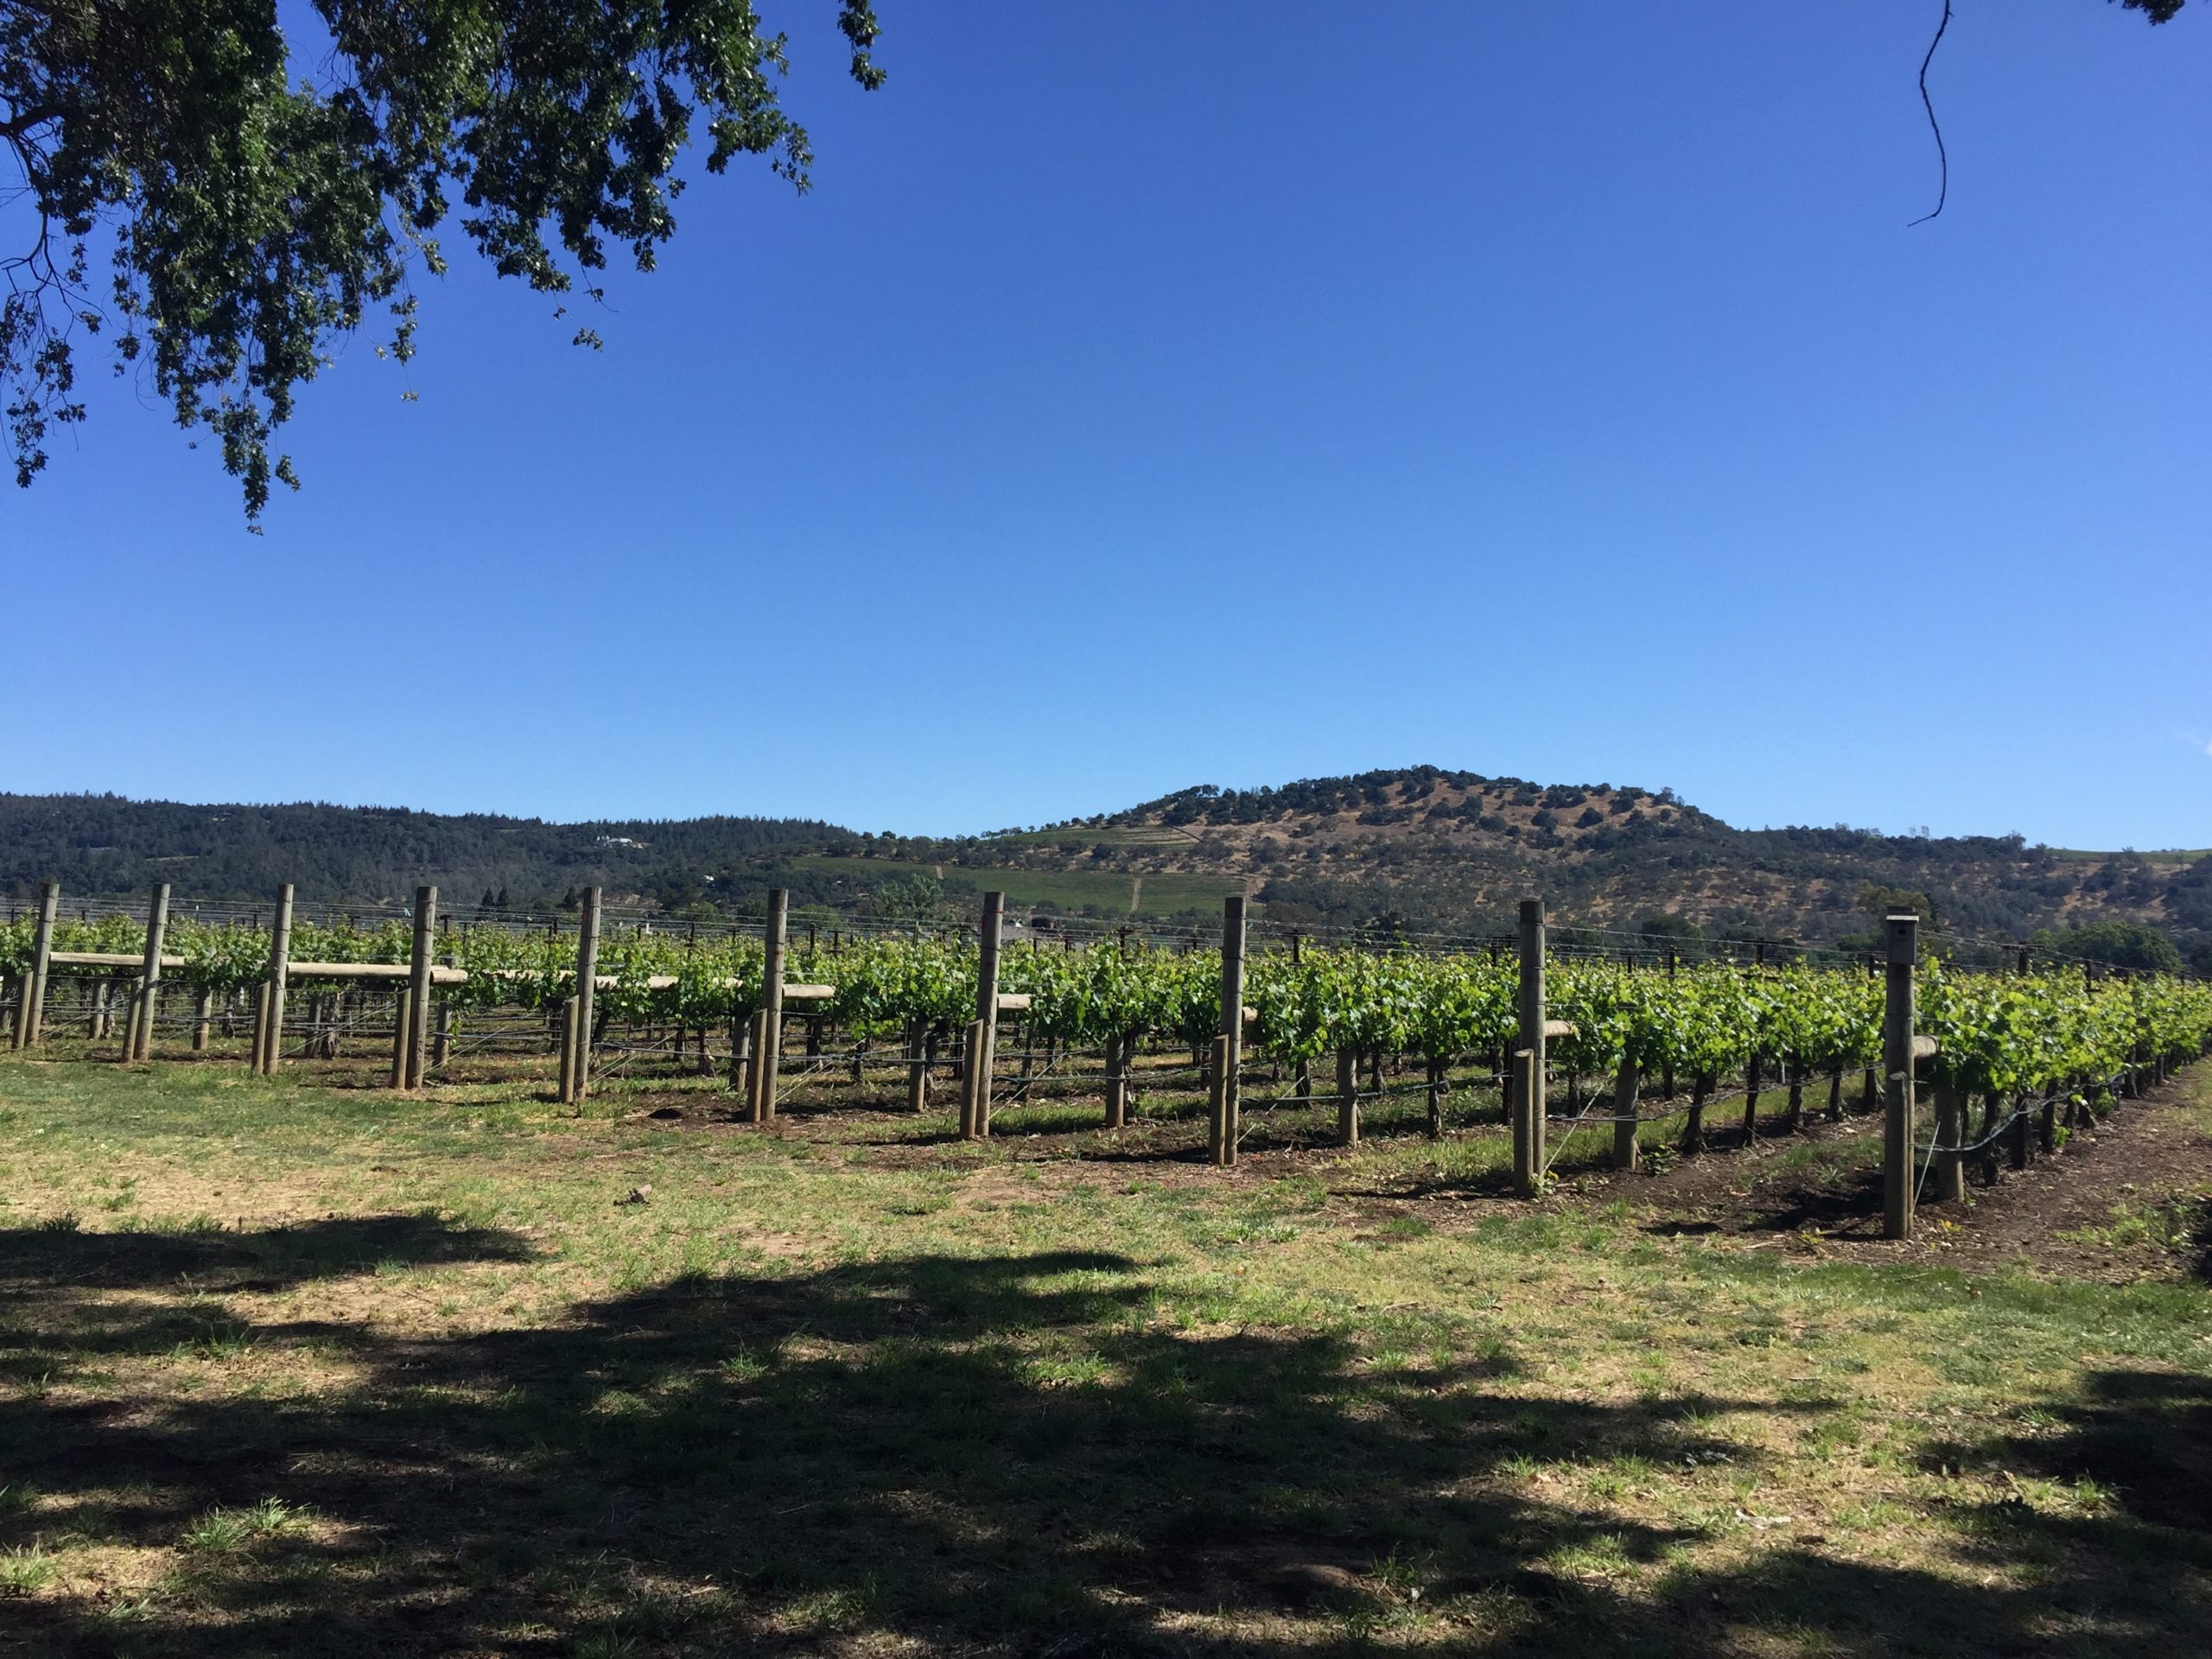 Napa Valley Rutherford California wine tasting grape vines Those Someday Goals